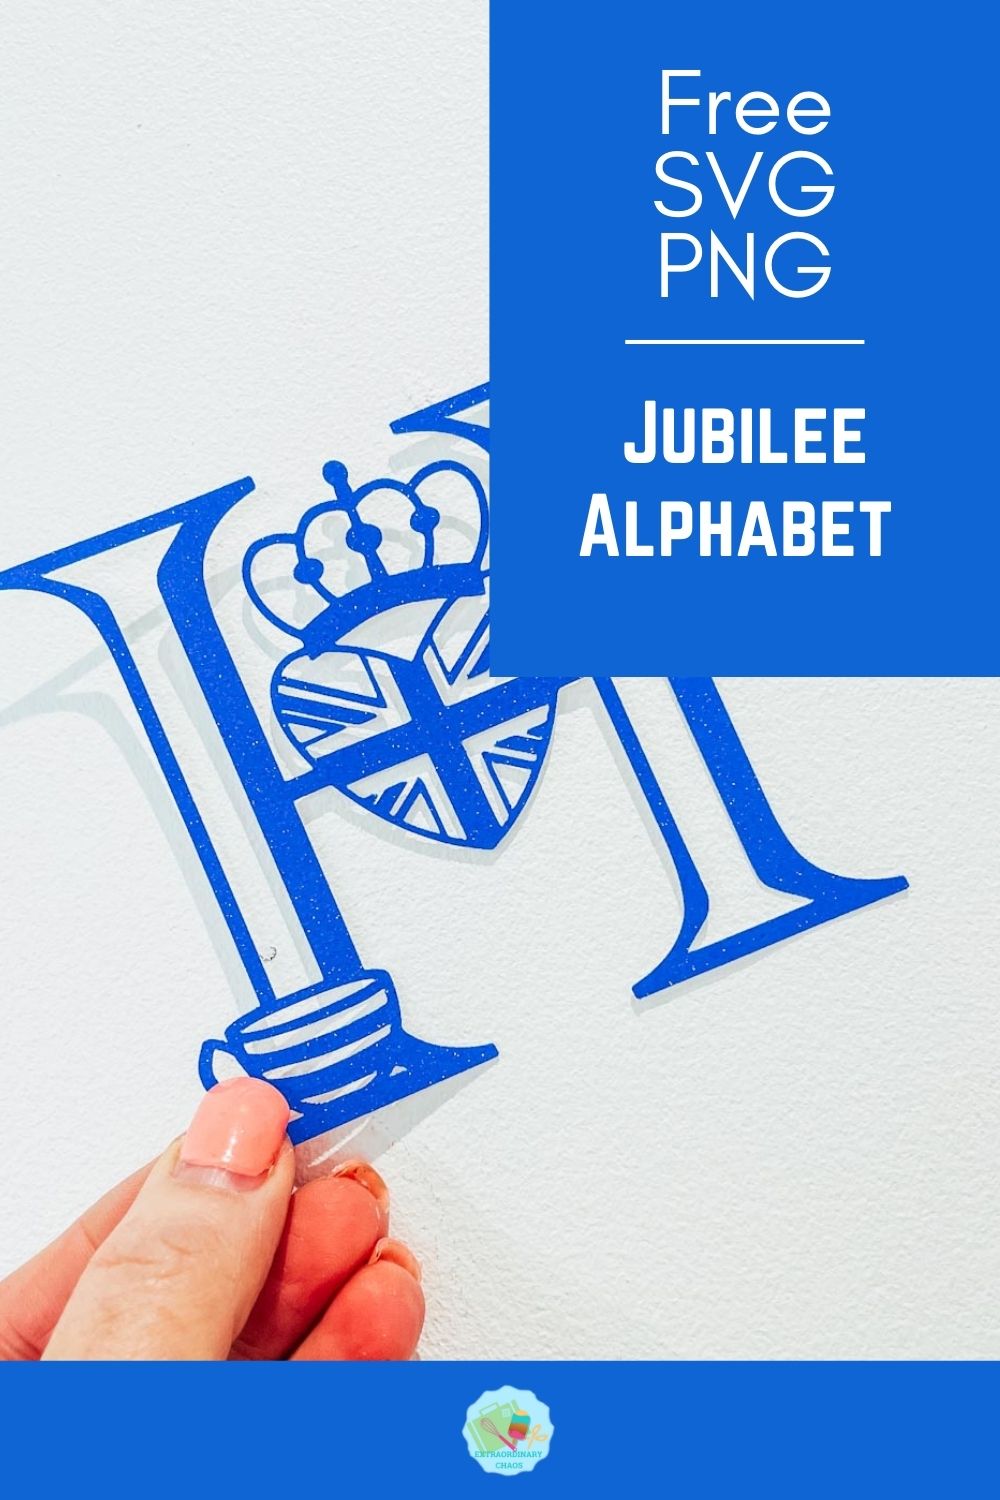 Free Queens Jubilee Alphabet and numbers for Cricut, Silhouette and Glowgforge